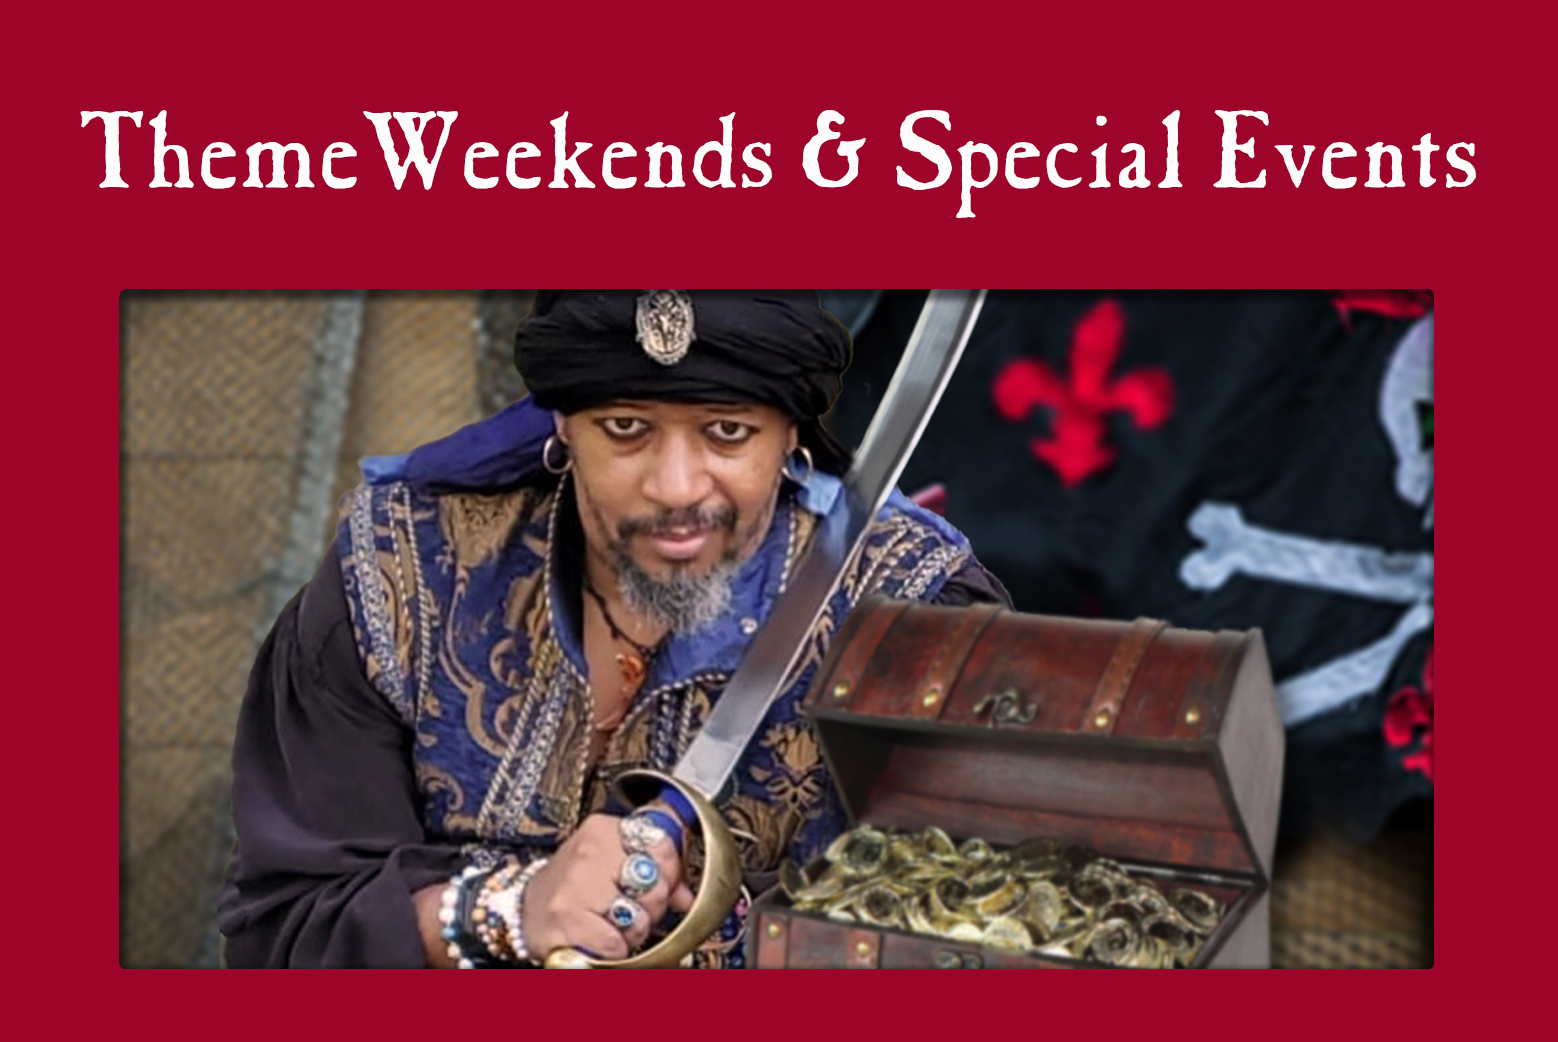 Pirate and Marketplace Weekend - Irwindale Pleasure Faire - Irwindale, CA